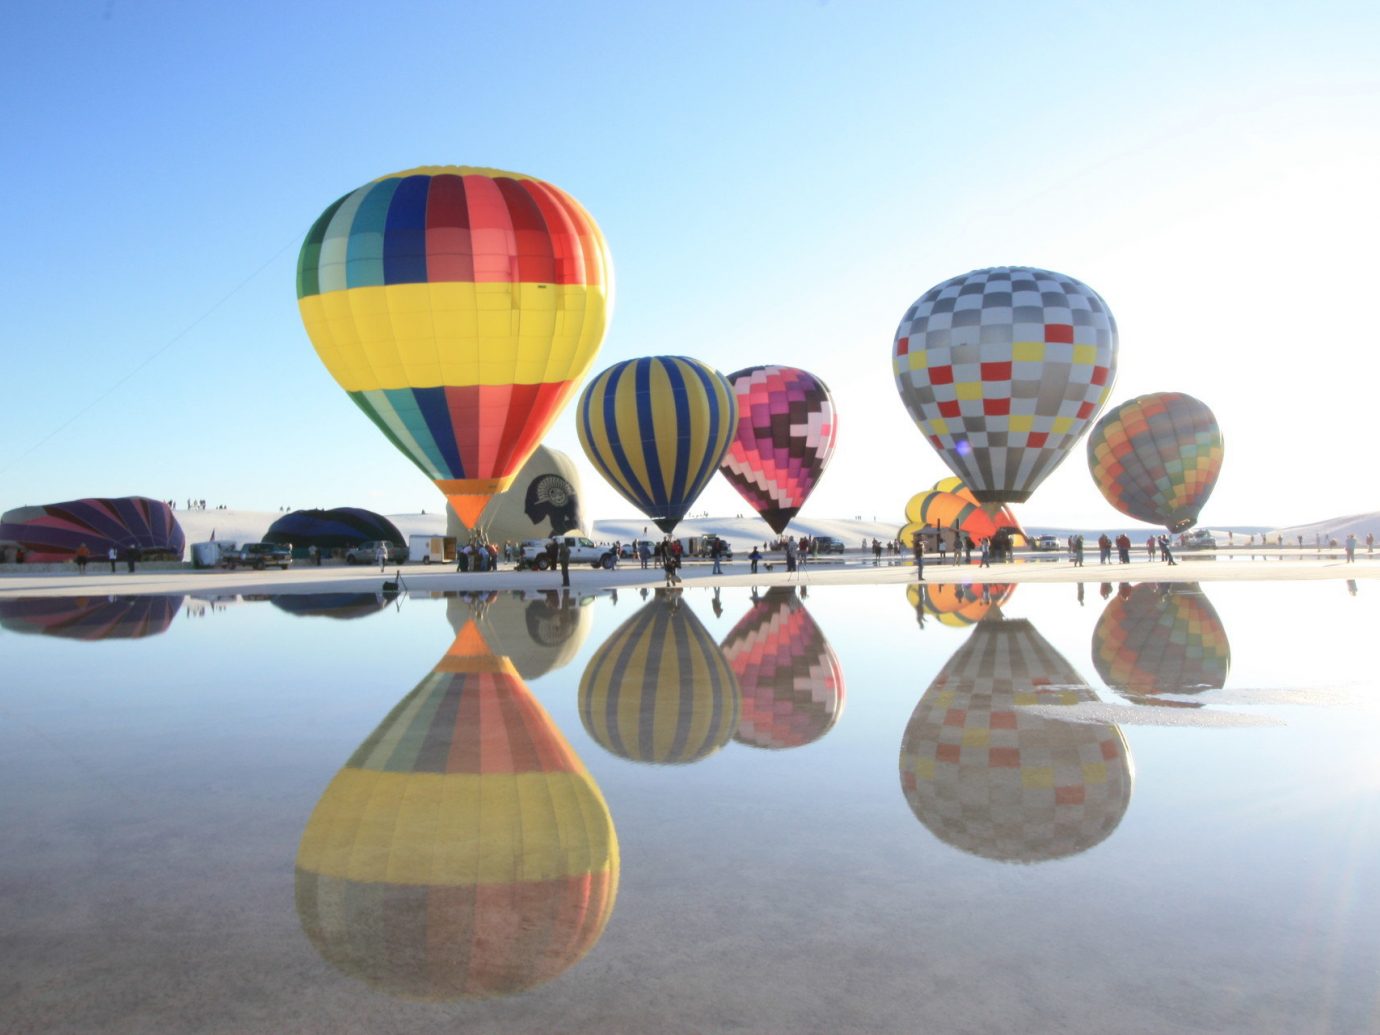 Trip Ideas transport aircraft balloon sky Hot Air Balloon vehicle atmosphere of earth hot air ballooning toy colorful colored